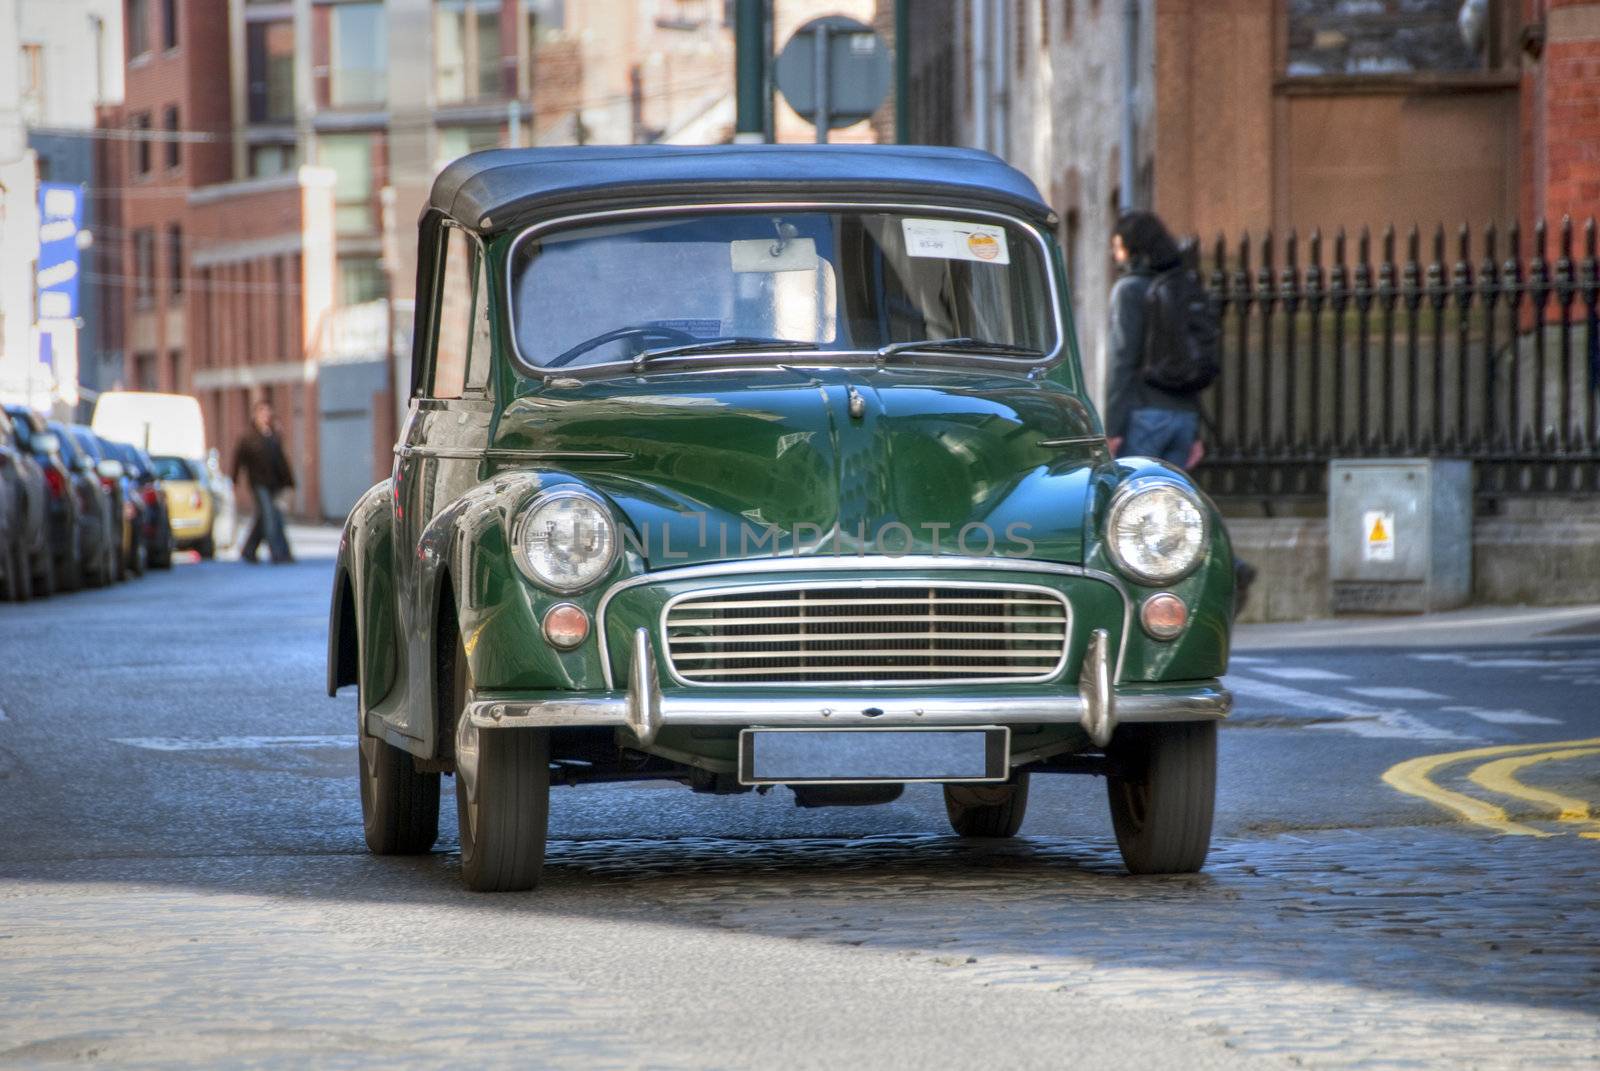 Old Car in Dublin, February 2009 by jovannig